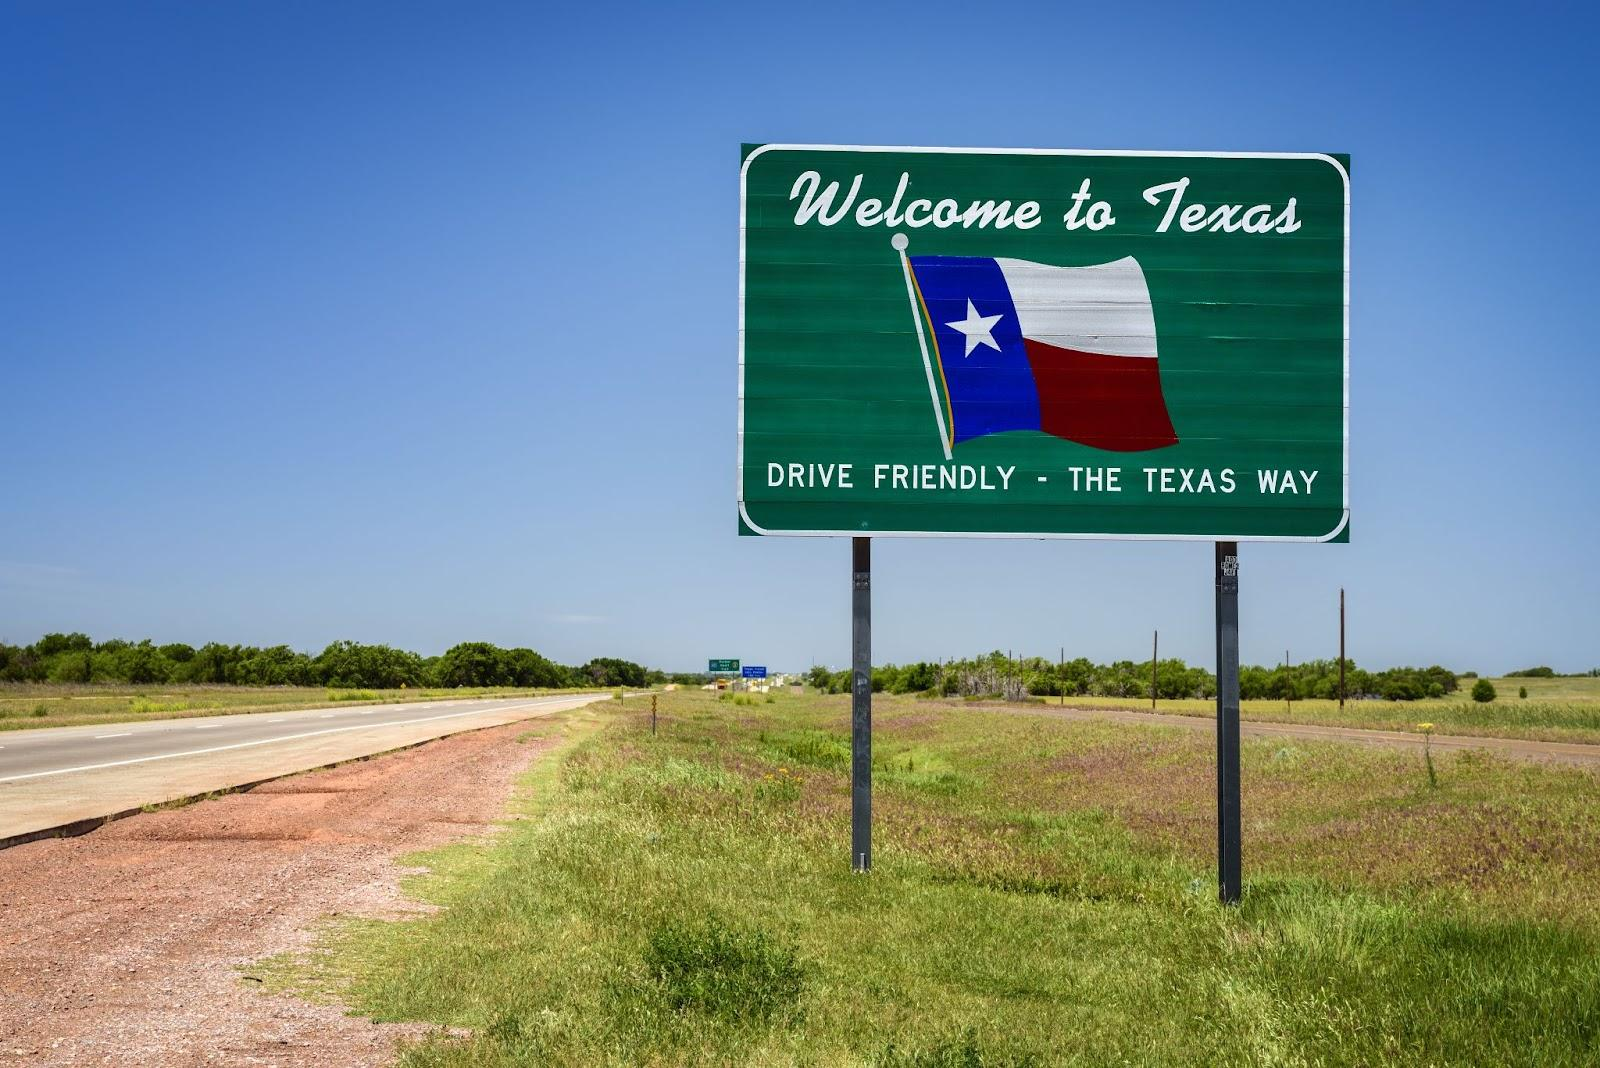 Moving to Texas